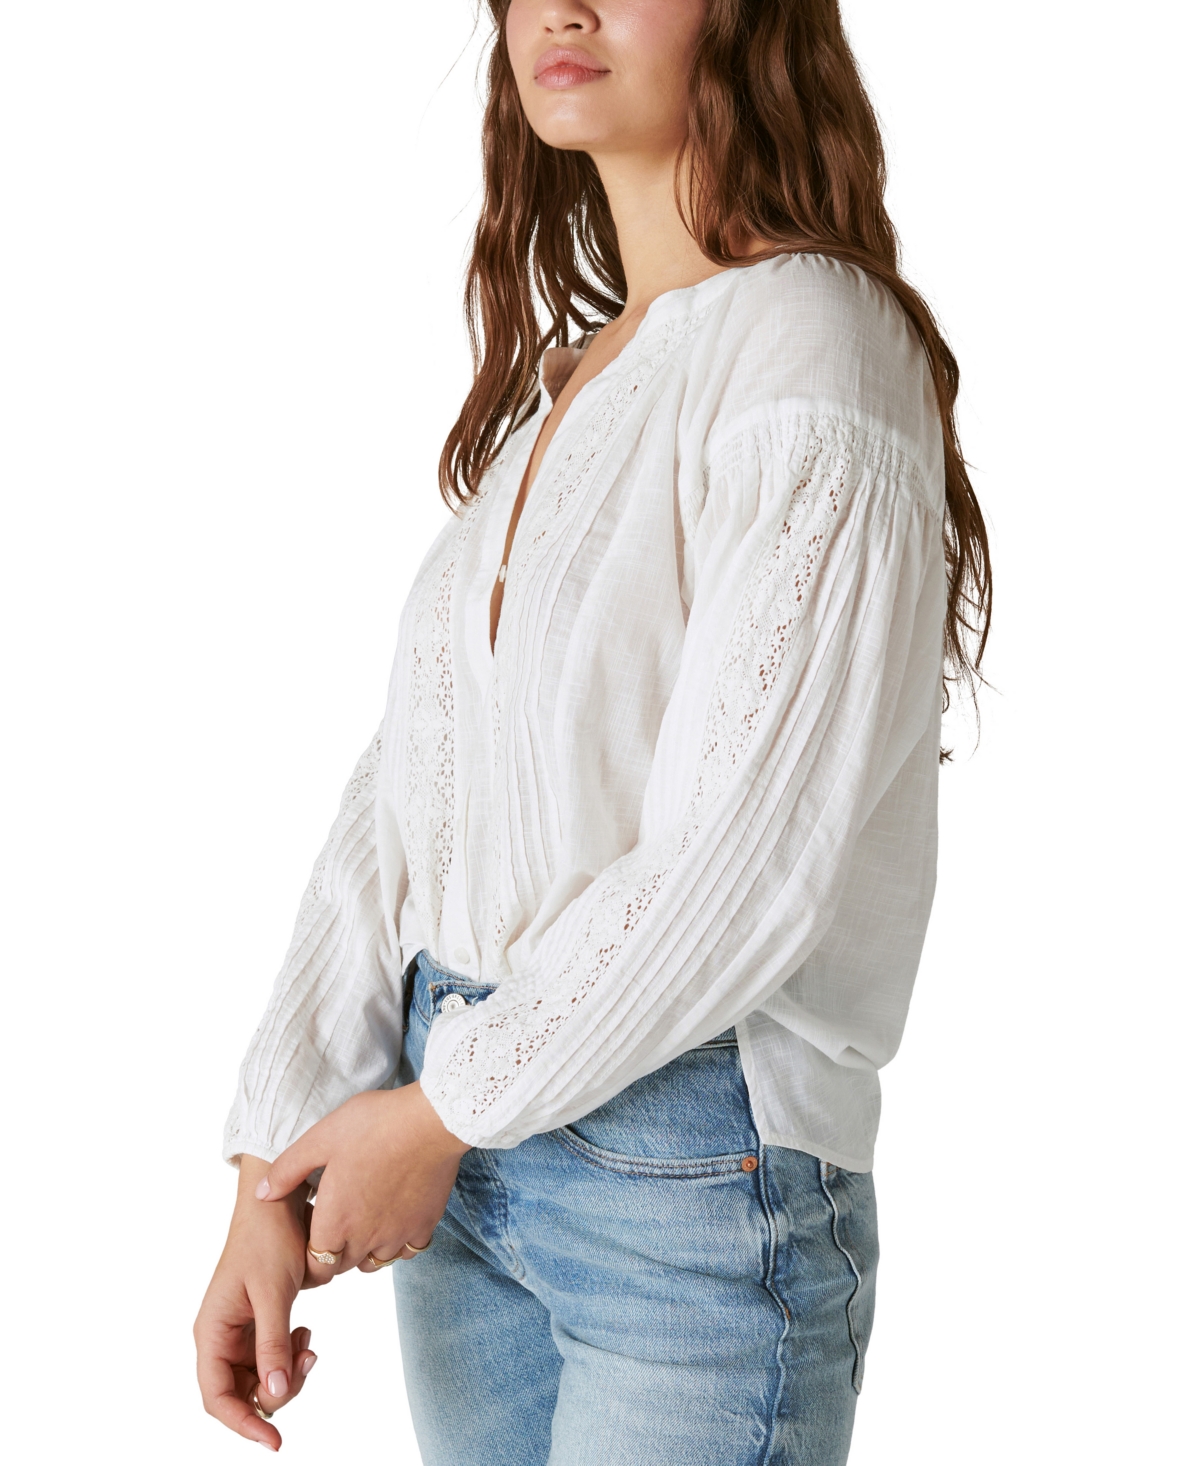 Lucky Brand Women's Relaxed Lace Open Neck Shirt, Bright White, X